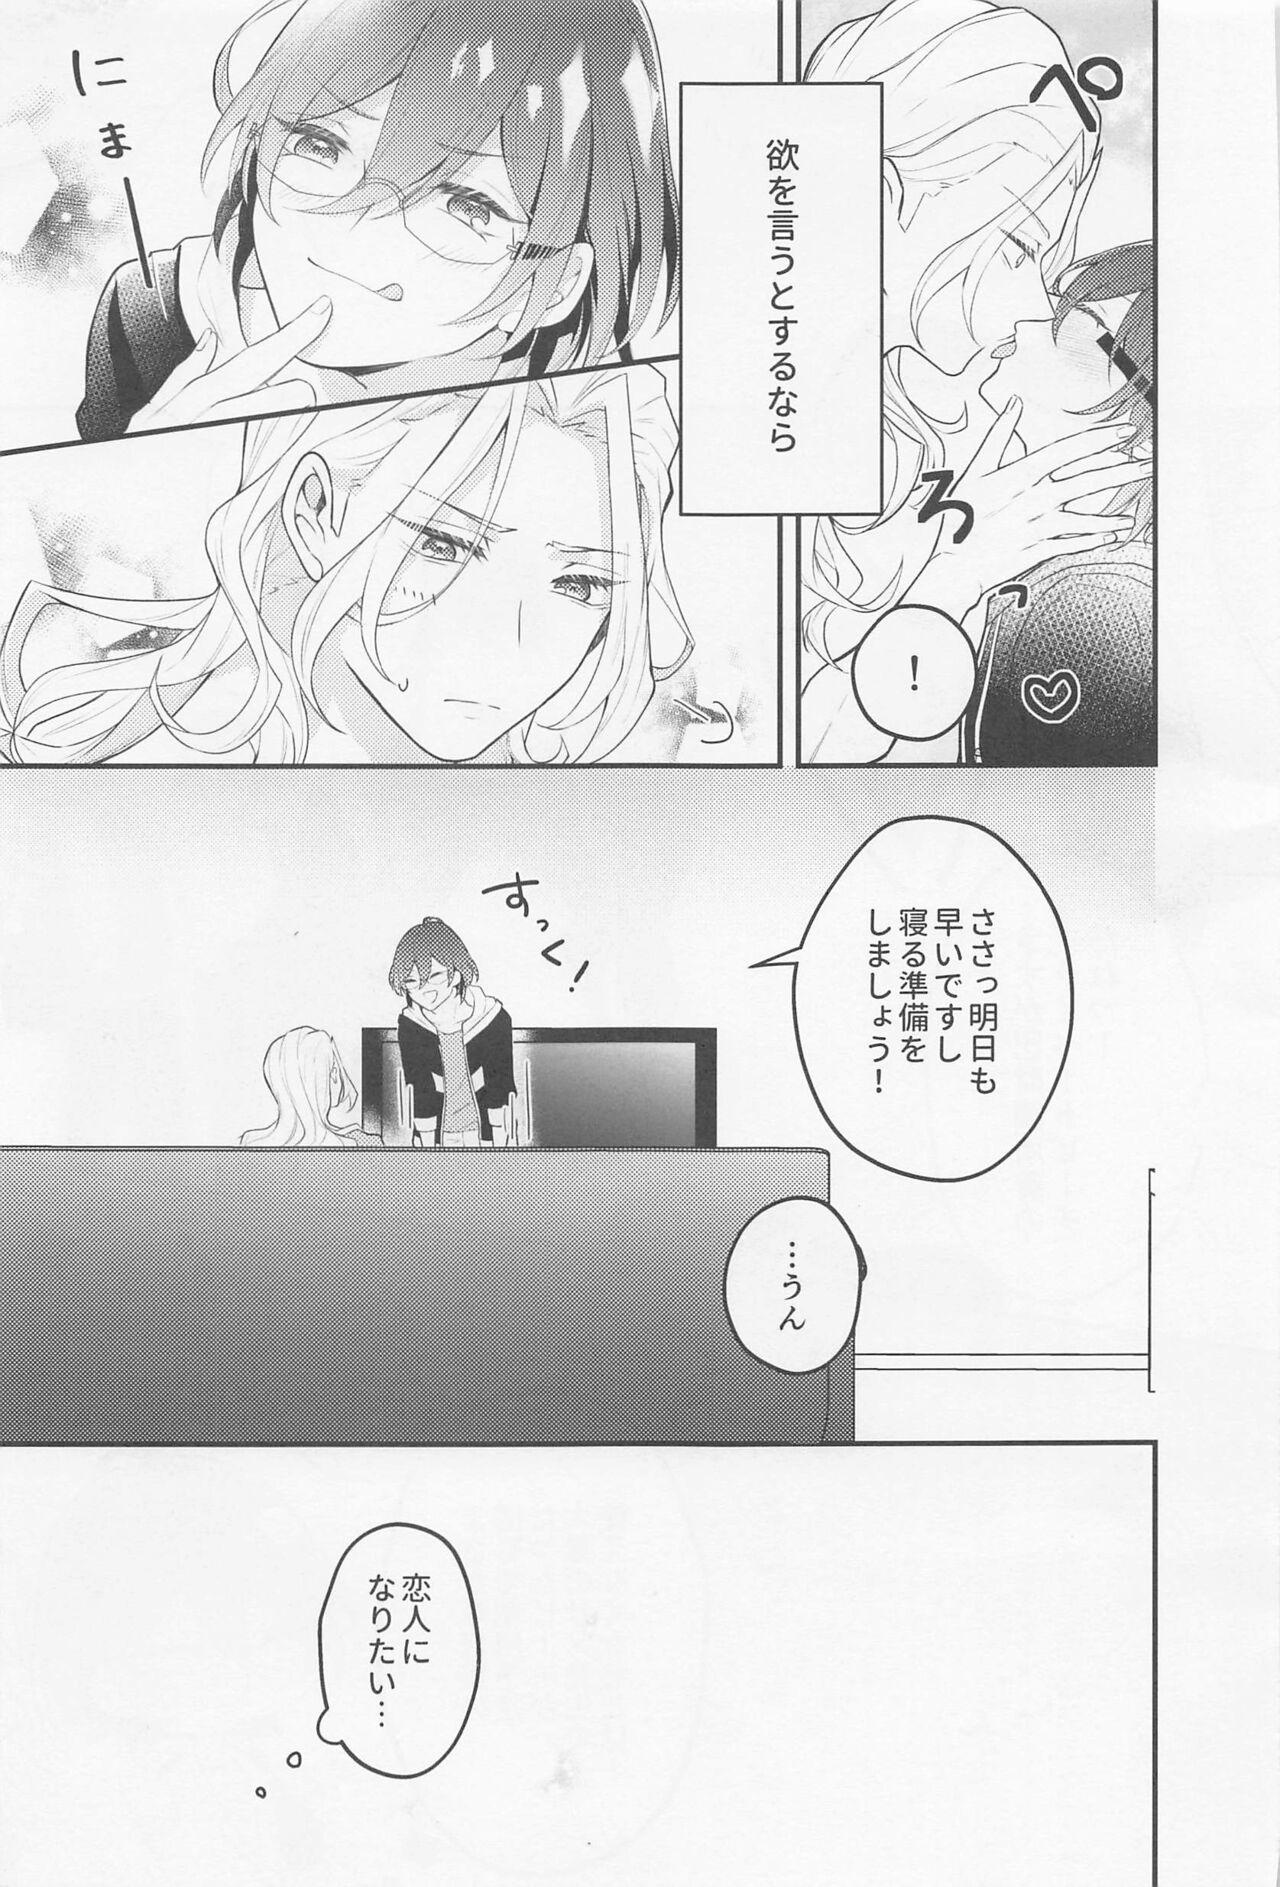 High Heels Melt by you! 2 - Ensemble stars Tanned - Page 6